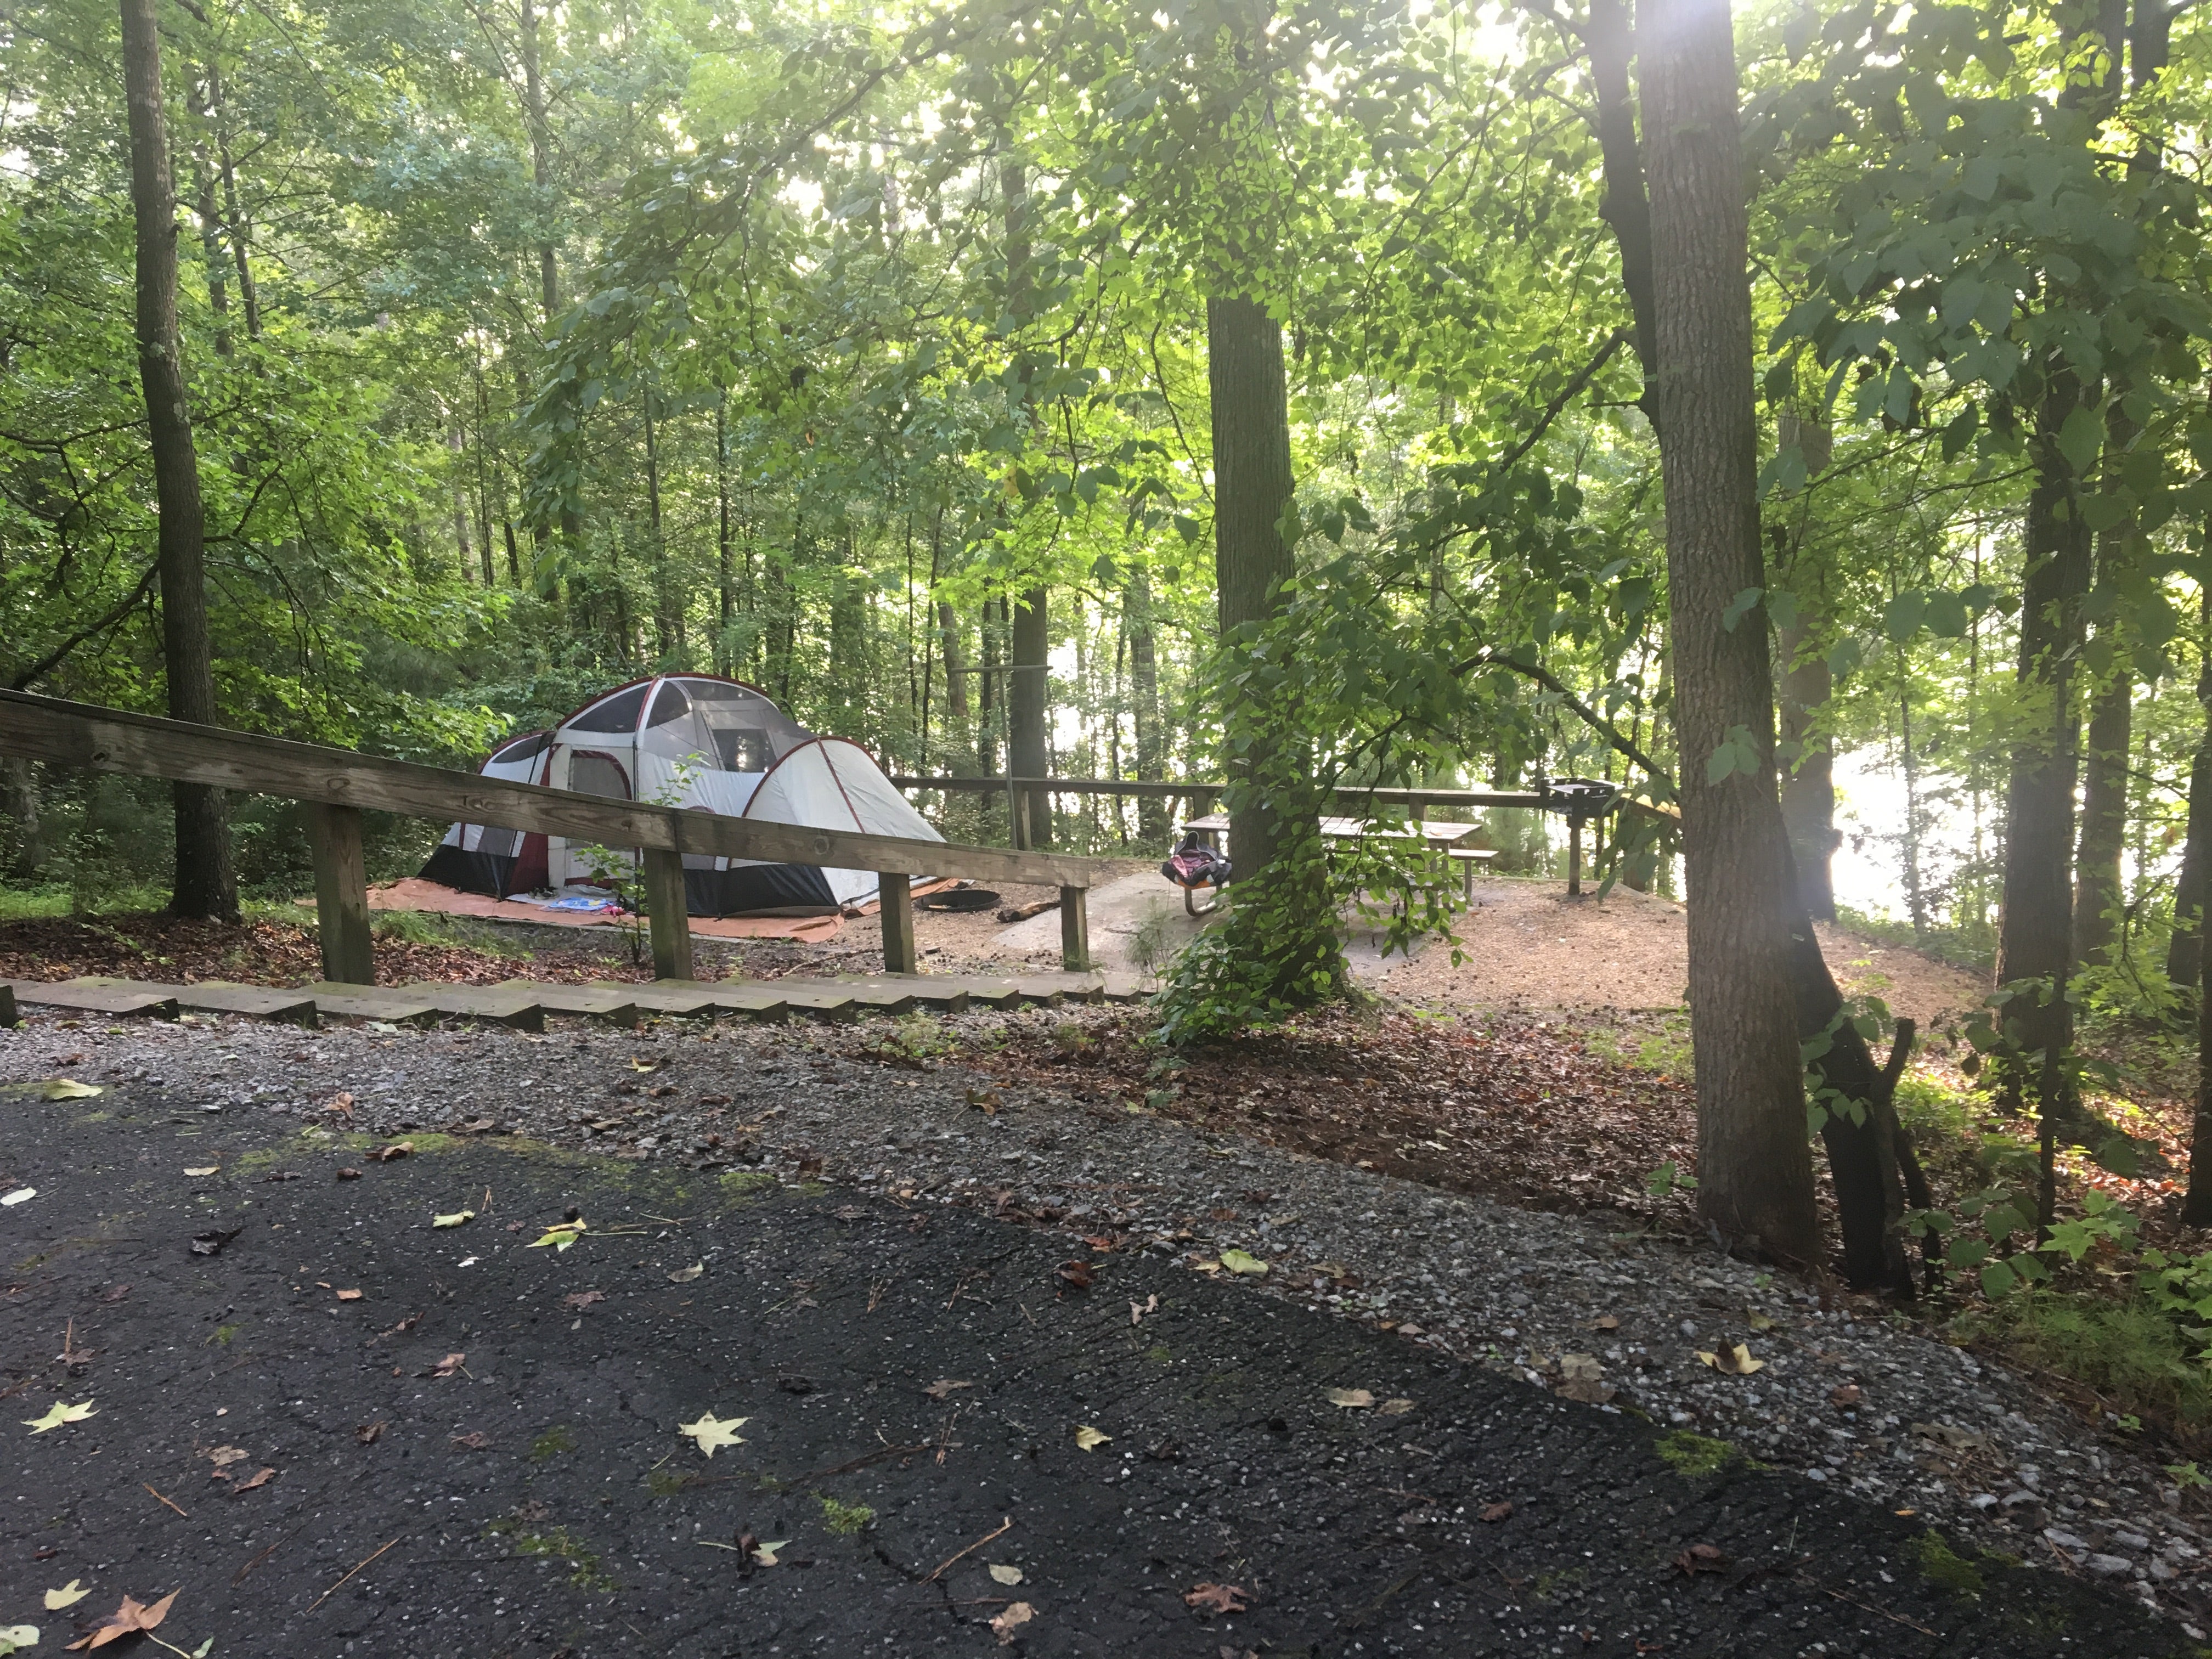 The photo was taken on the pull-through driveway of the site, looking down the staircase on the gravel pad, picnic table, and lake. The hook-ups for water and electric were on the pull-through driveway part - perfect for an RV, but up the flight of stairs for us tent folks. 